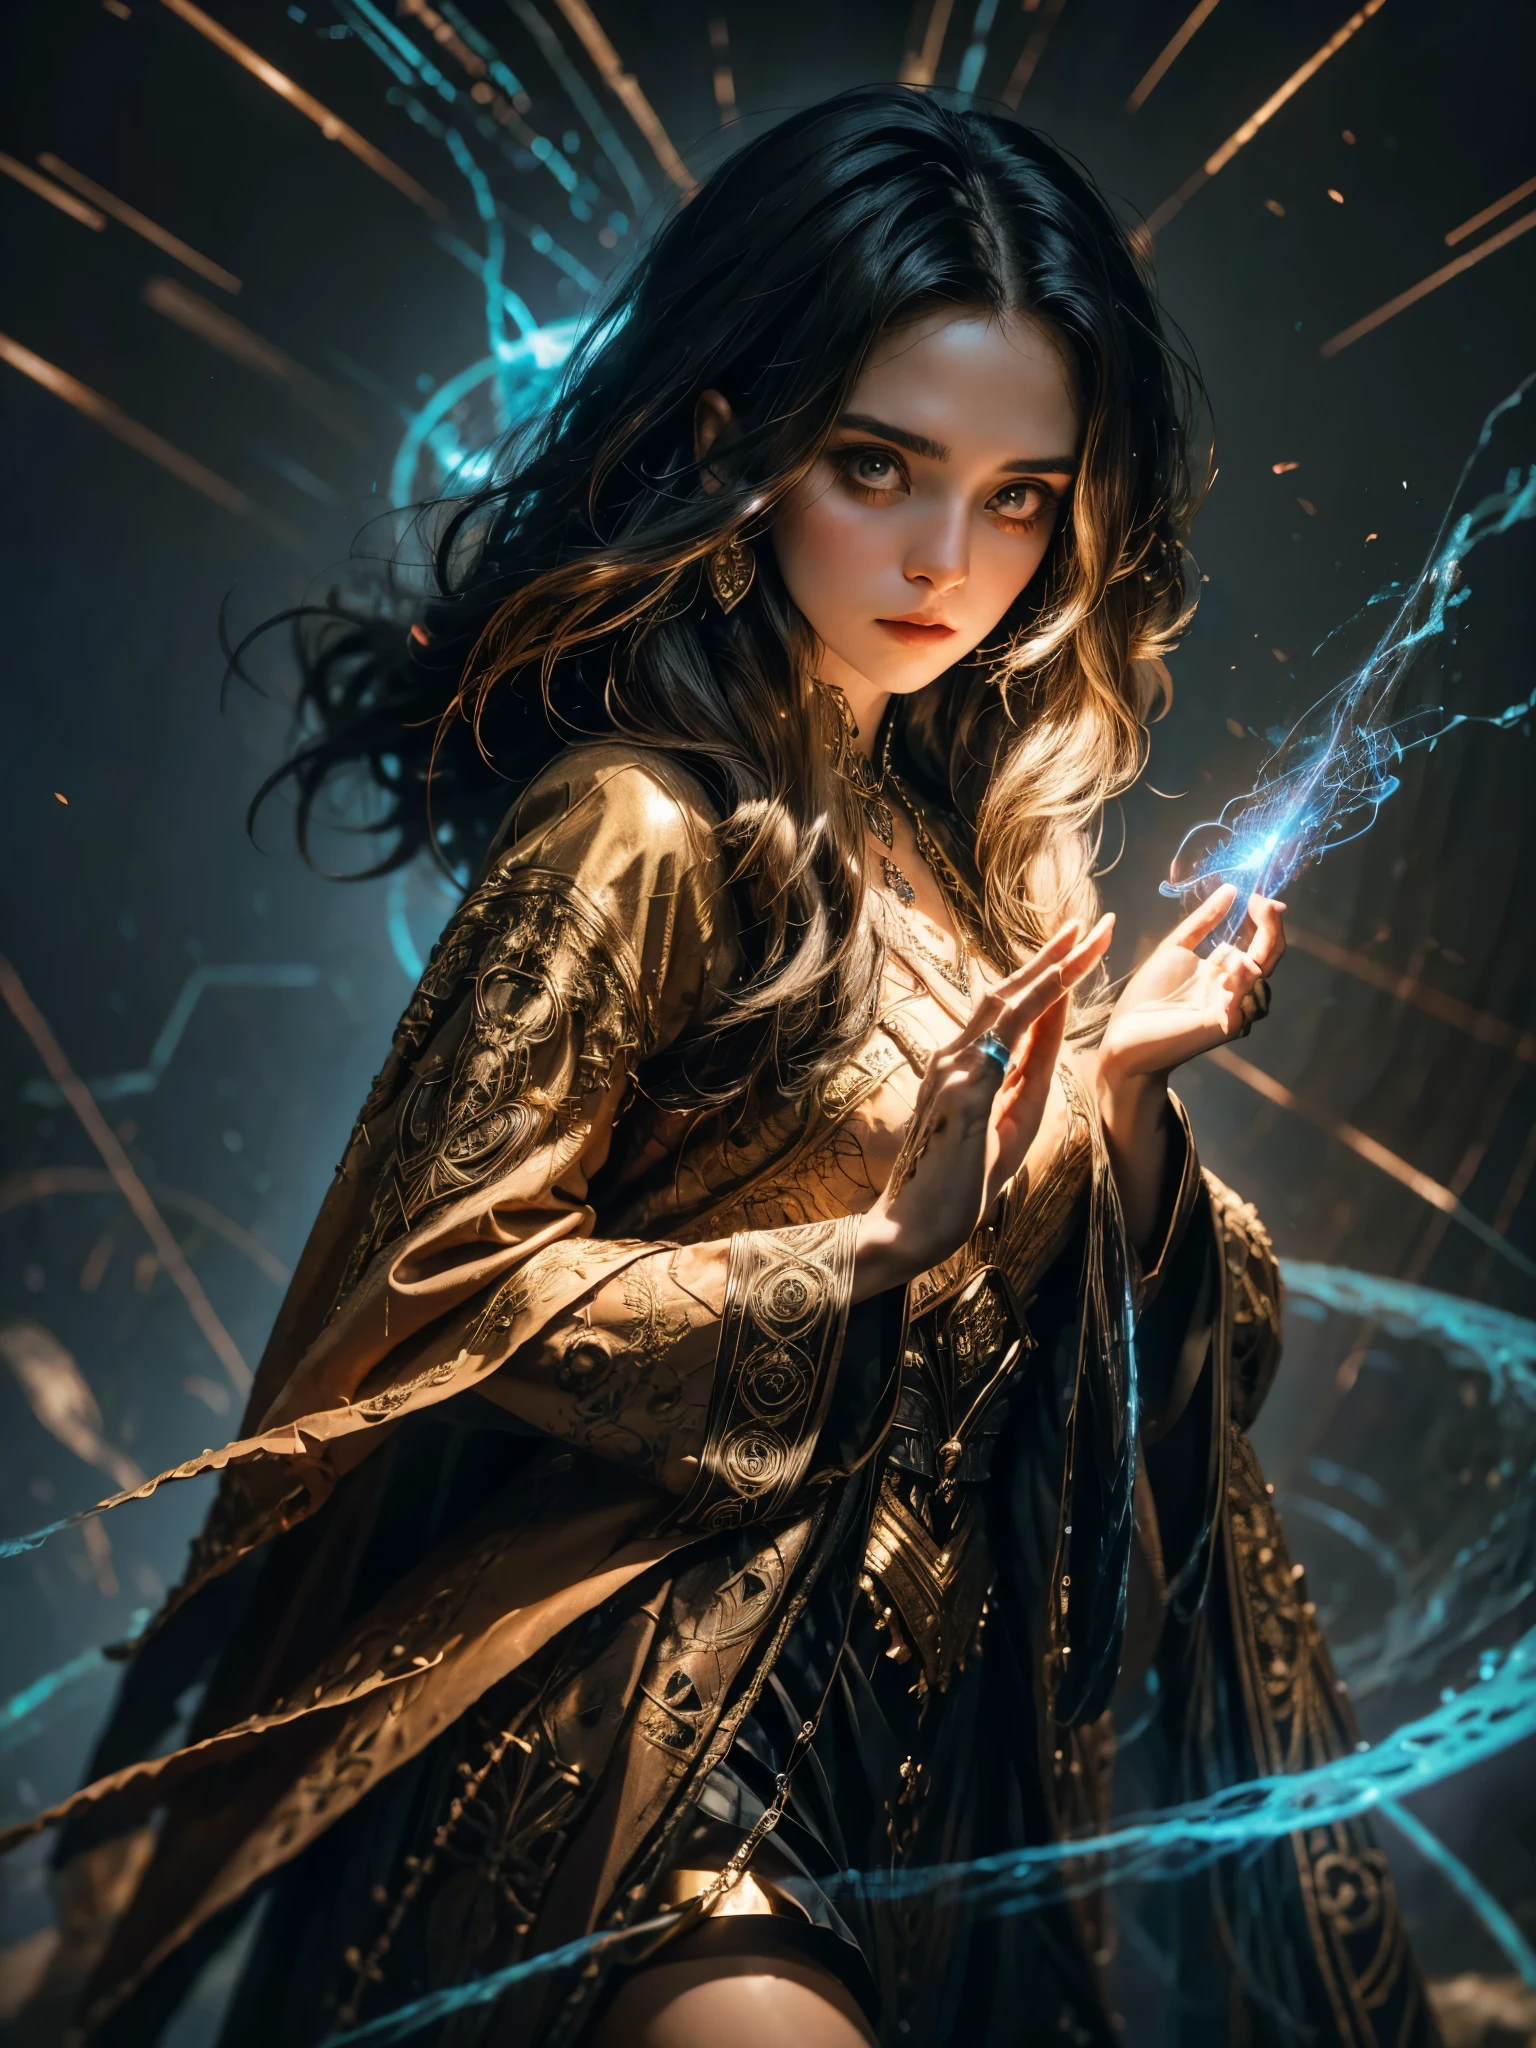 A young sorceress stands poised with one hand raised, her fingers delicately weaving intricate patterns in the air as she channels magical energy. Her vibrant robes billow around her, adorned with intricate runes and symbols that seem to shimmer with arcane power. Her eyes blaze with determination, and wisps of magical energy dance around her as she prepares to unleash a powerful spell.